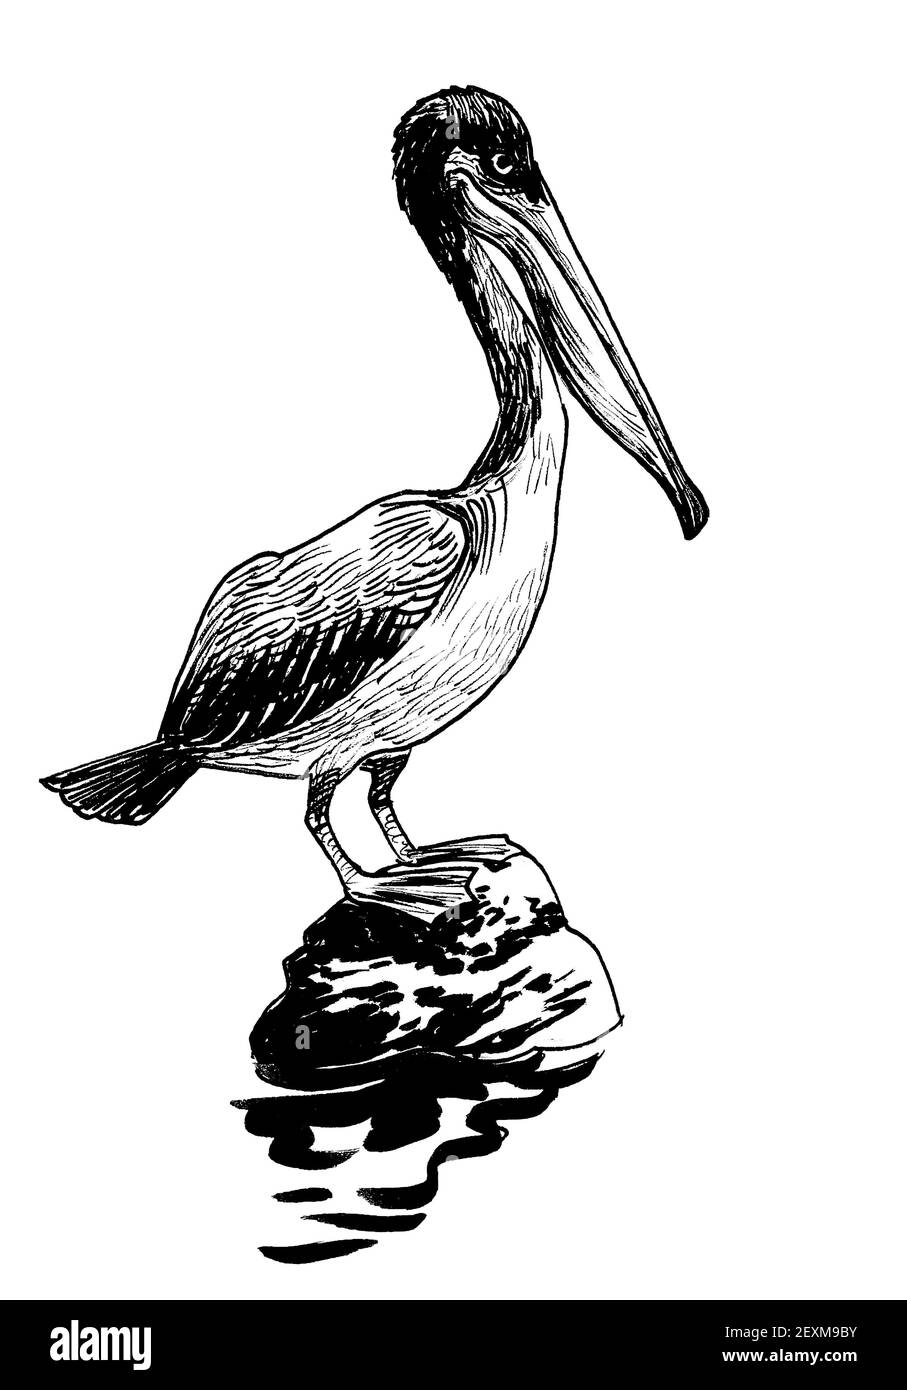 Pelican bird sitting on a stone. Ink black and white drawing Stock Photo